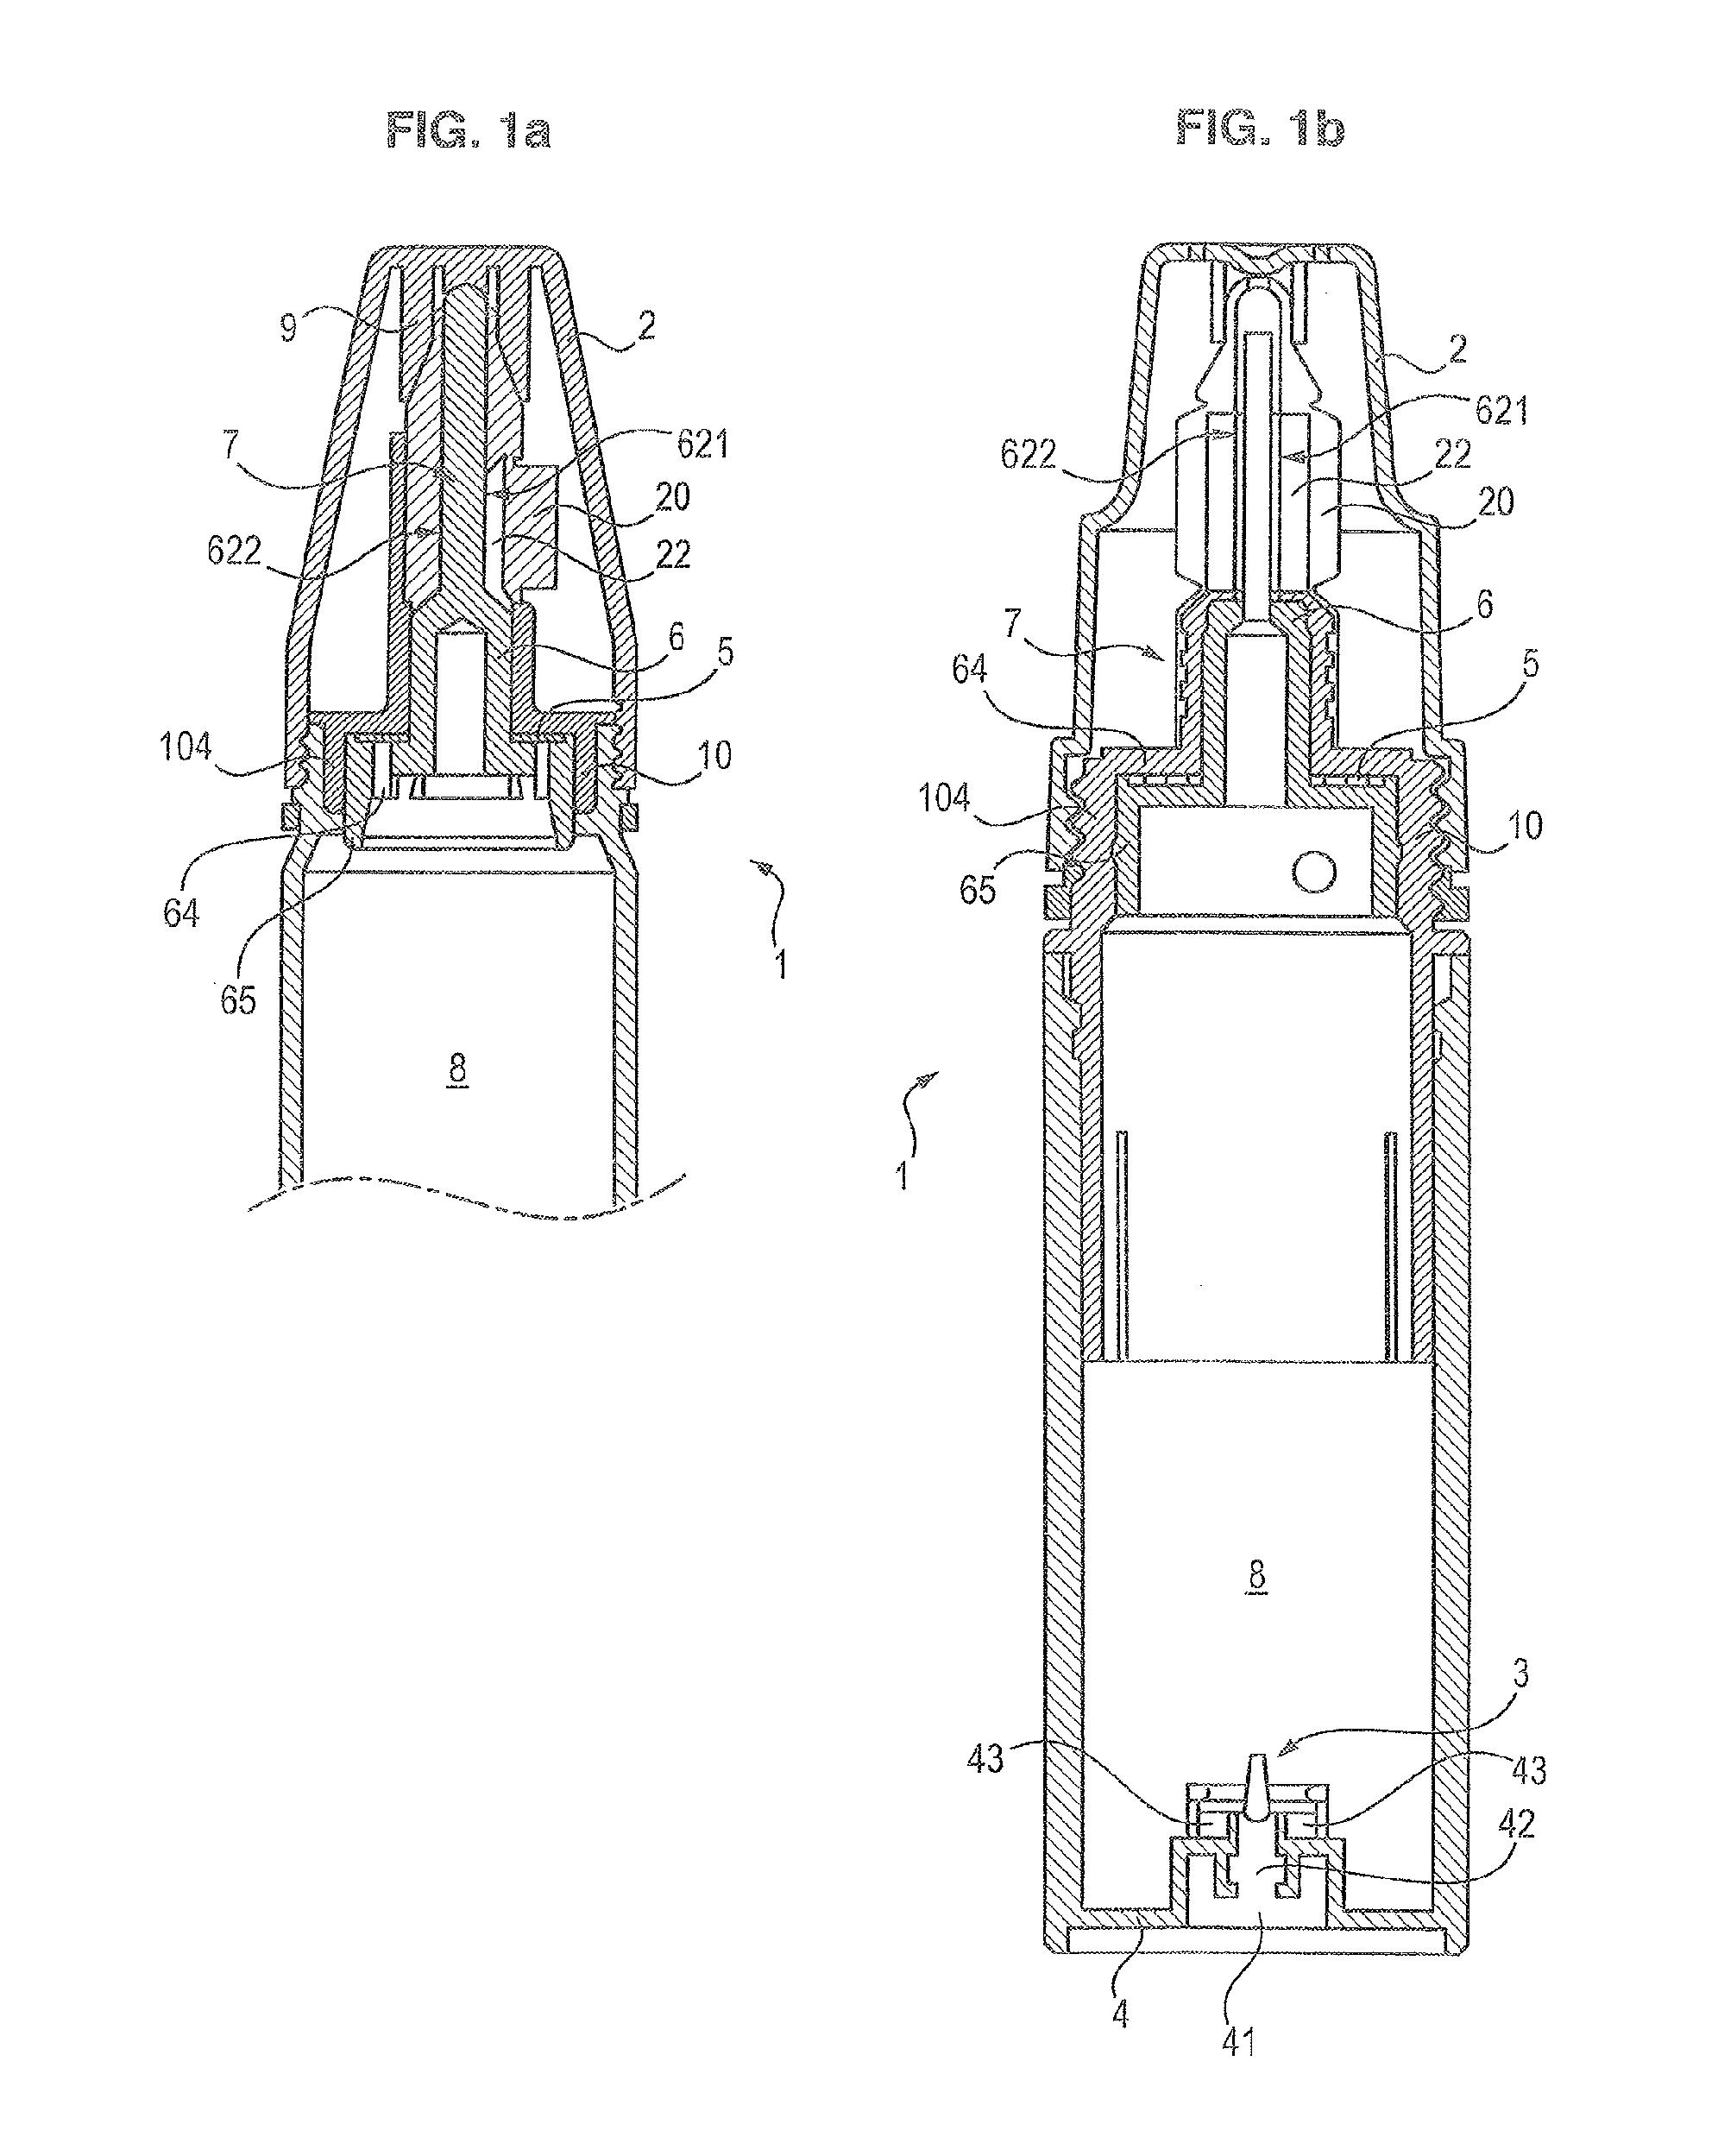 Device for packaging and dispensing a substance for ophthalmic use